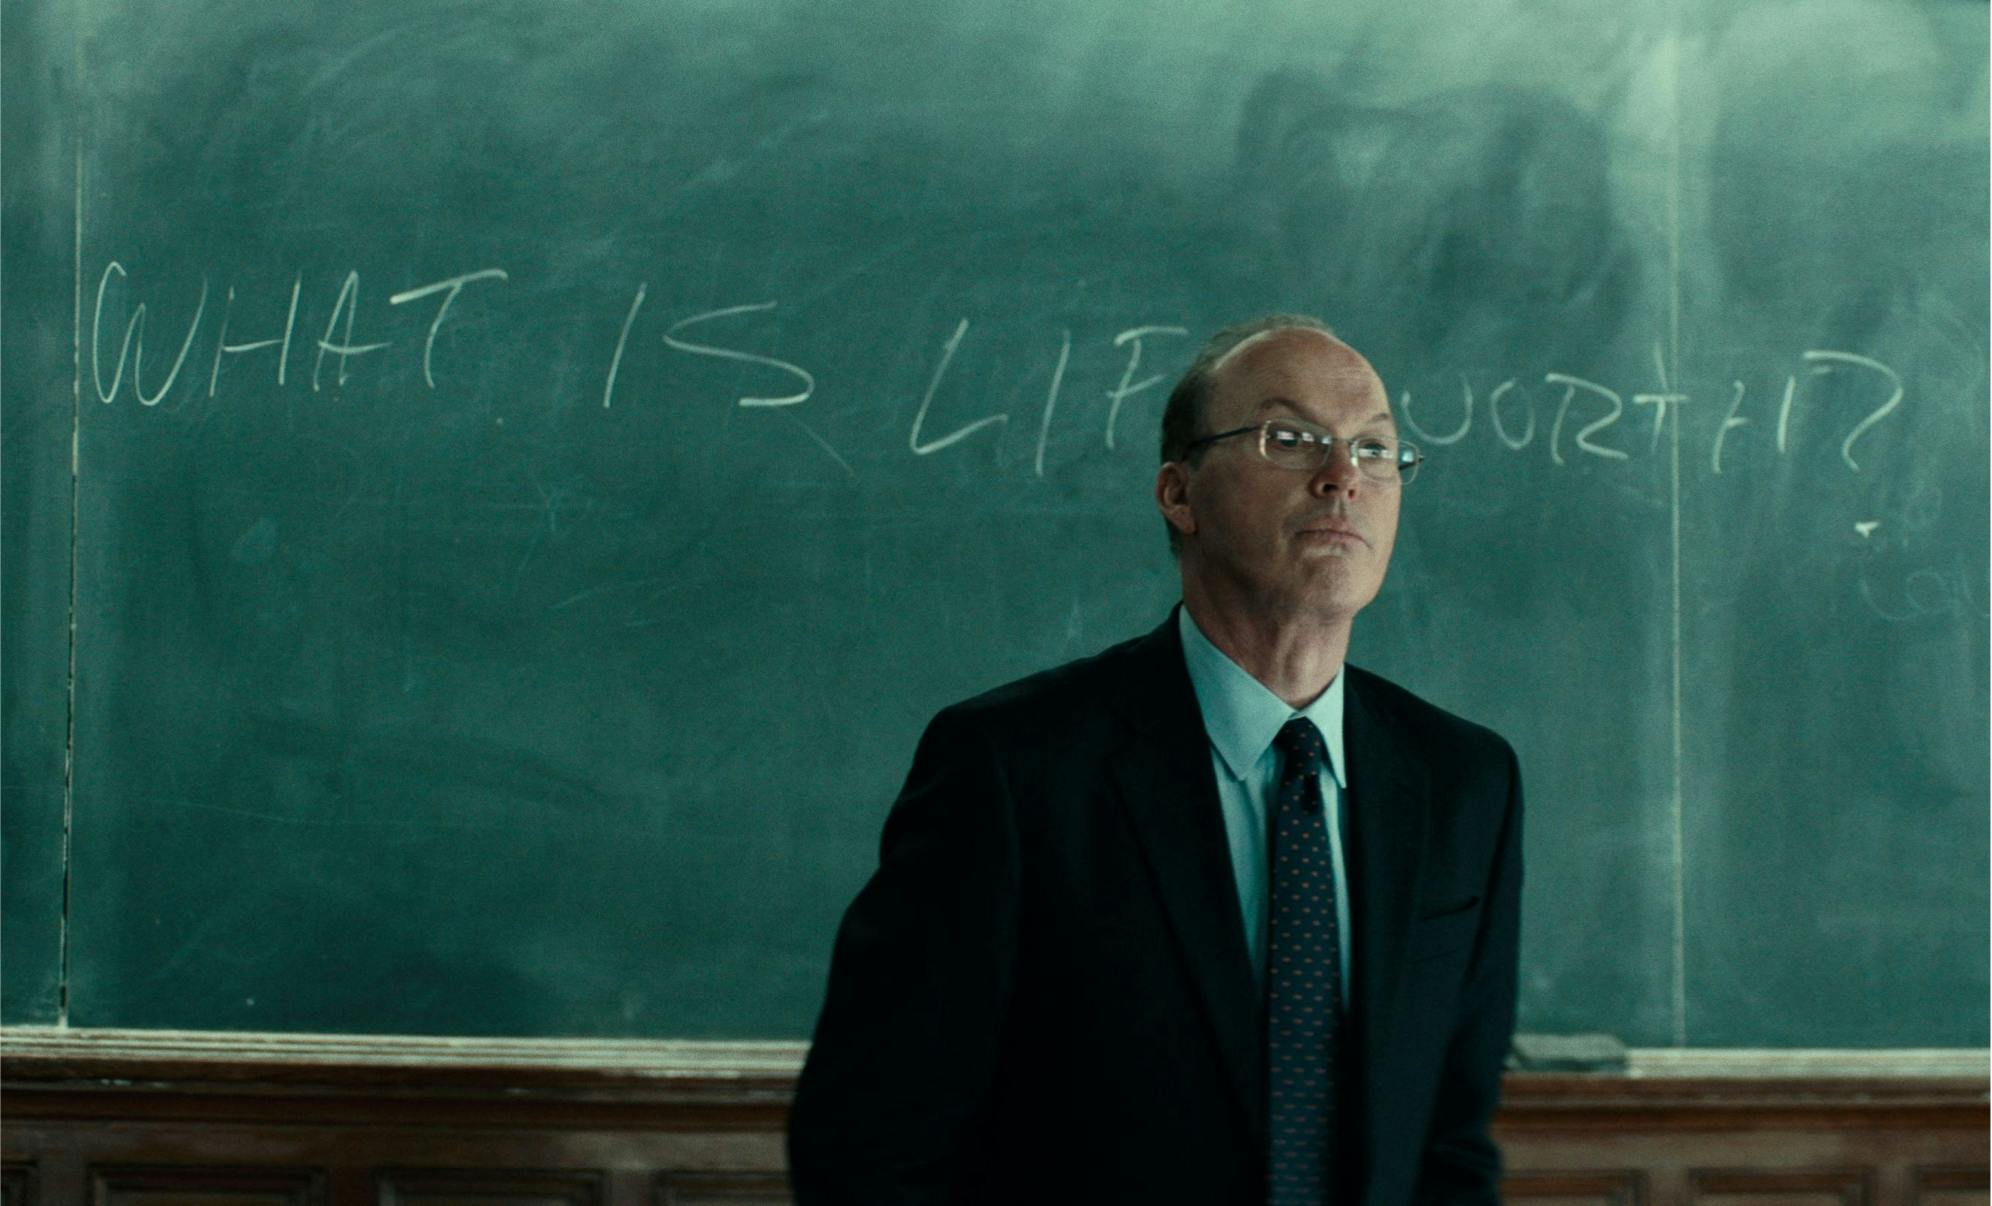 Kenneth Feinberg (Michael Keaton) stands in front of a chalkboard with the words: “What is life worth?” He wears a suit and glasses.